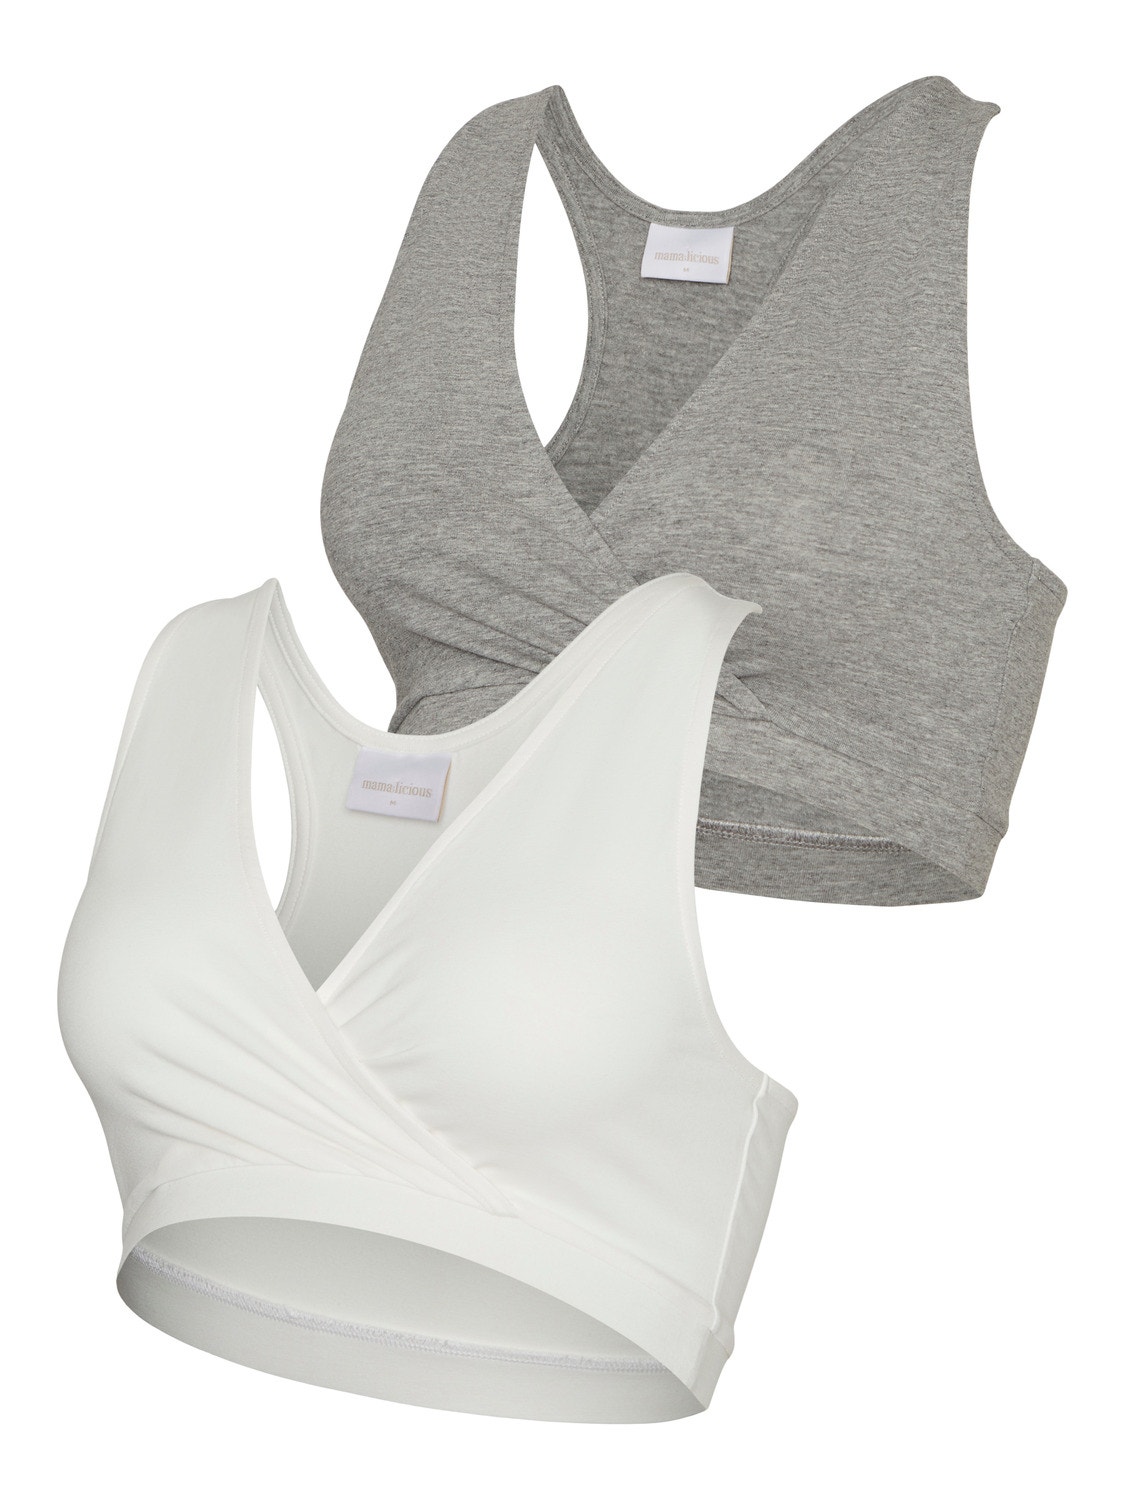 Mamalicious Maternity 2 pack nursing bra in grey and white